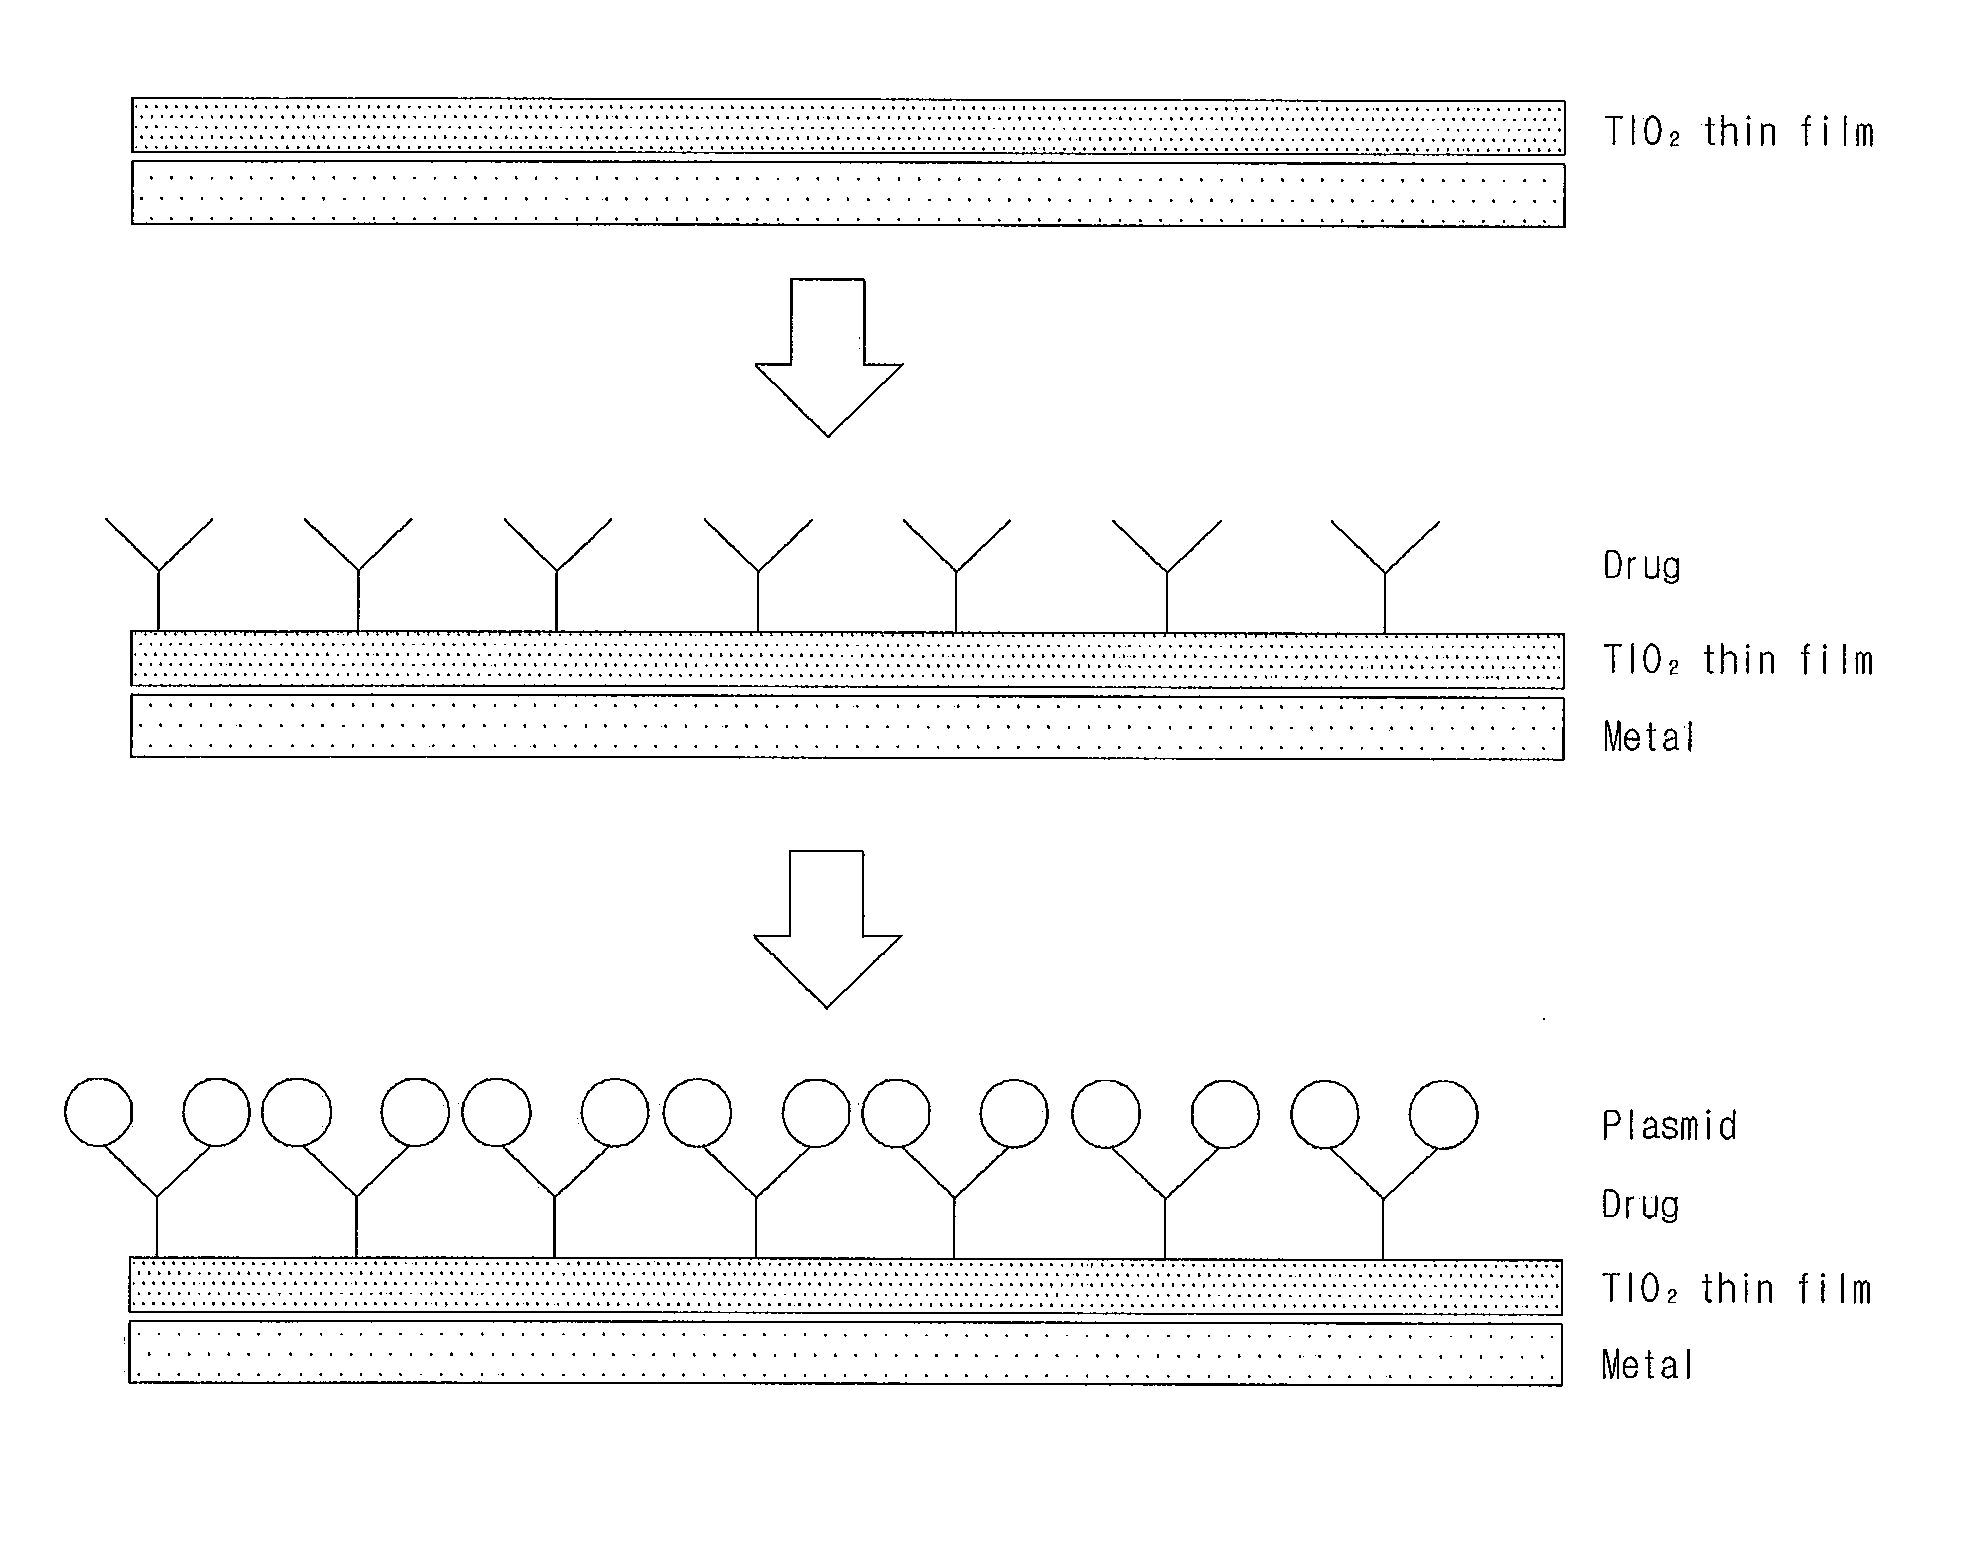 Gene Delivery Stent Using Titanium Oxide Thin Film Coating, and Method for Fabricating Same